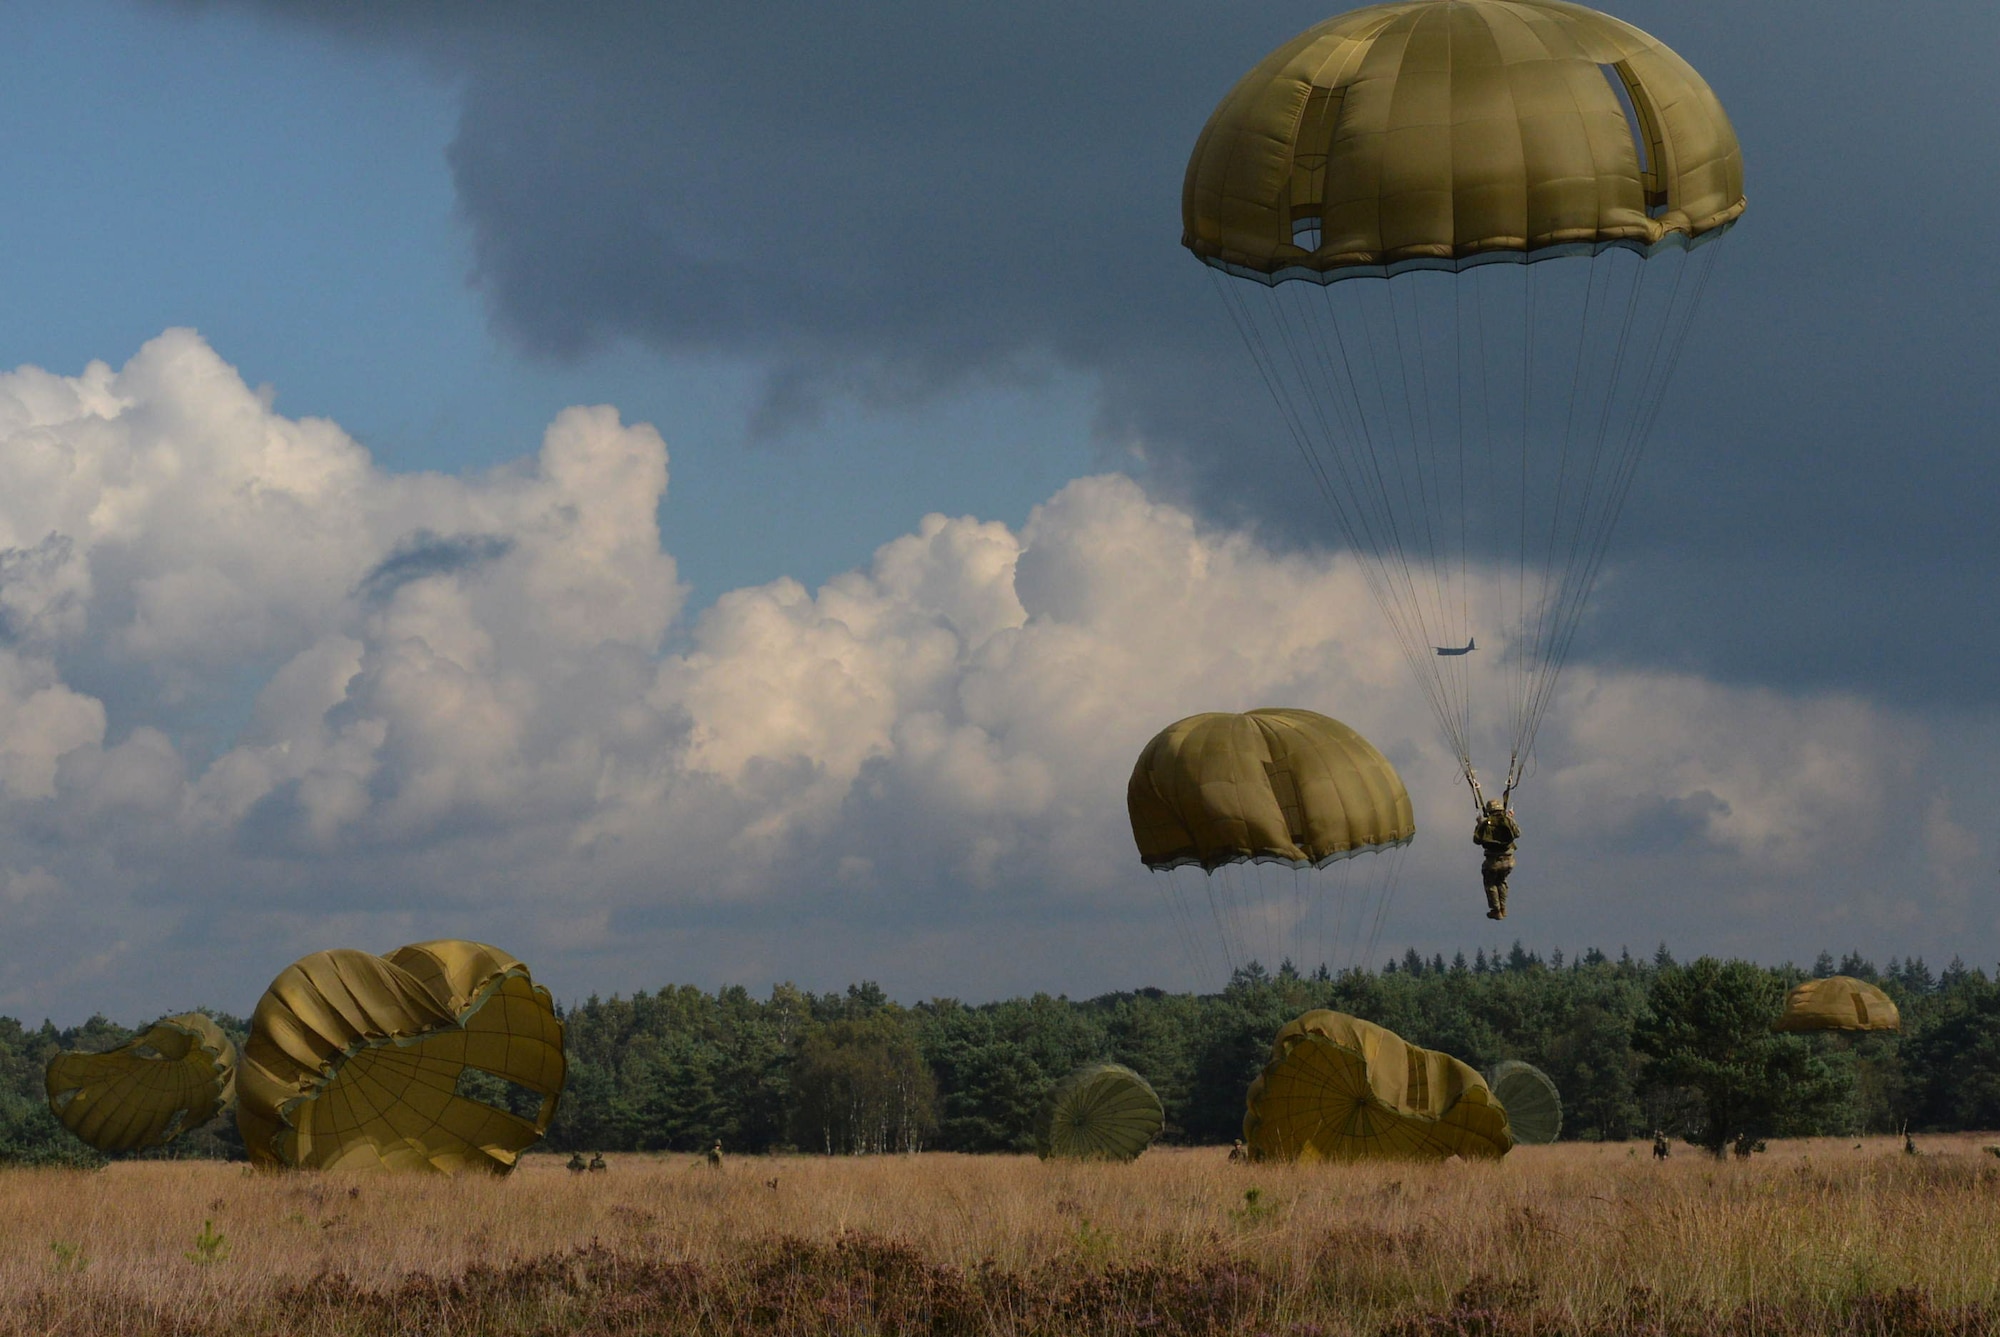 Parachute canopies fill the sky as paratroopers from eight countries land at the Houtdorperveld Drop Zone during Falcon Leap Sept. 15, 2017, Ermelo, Netherlands. (U.S. Air Force photo by Airman 1st Class Codie Collins)